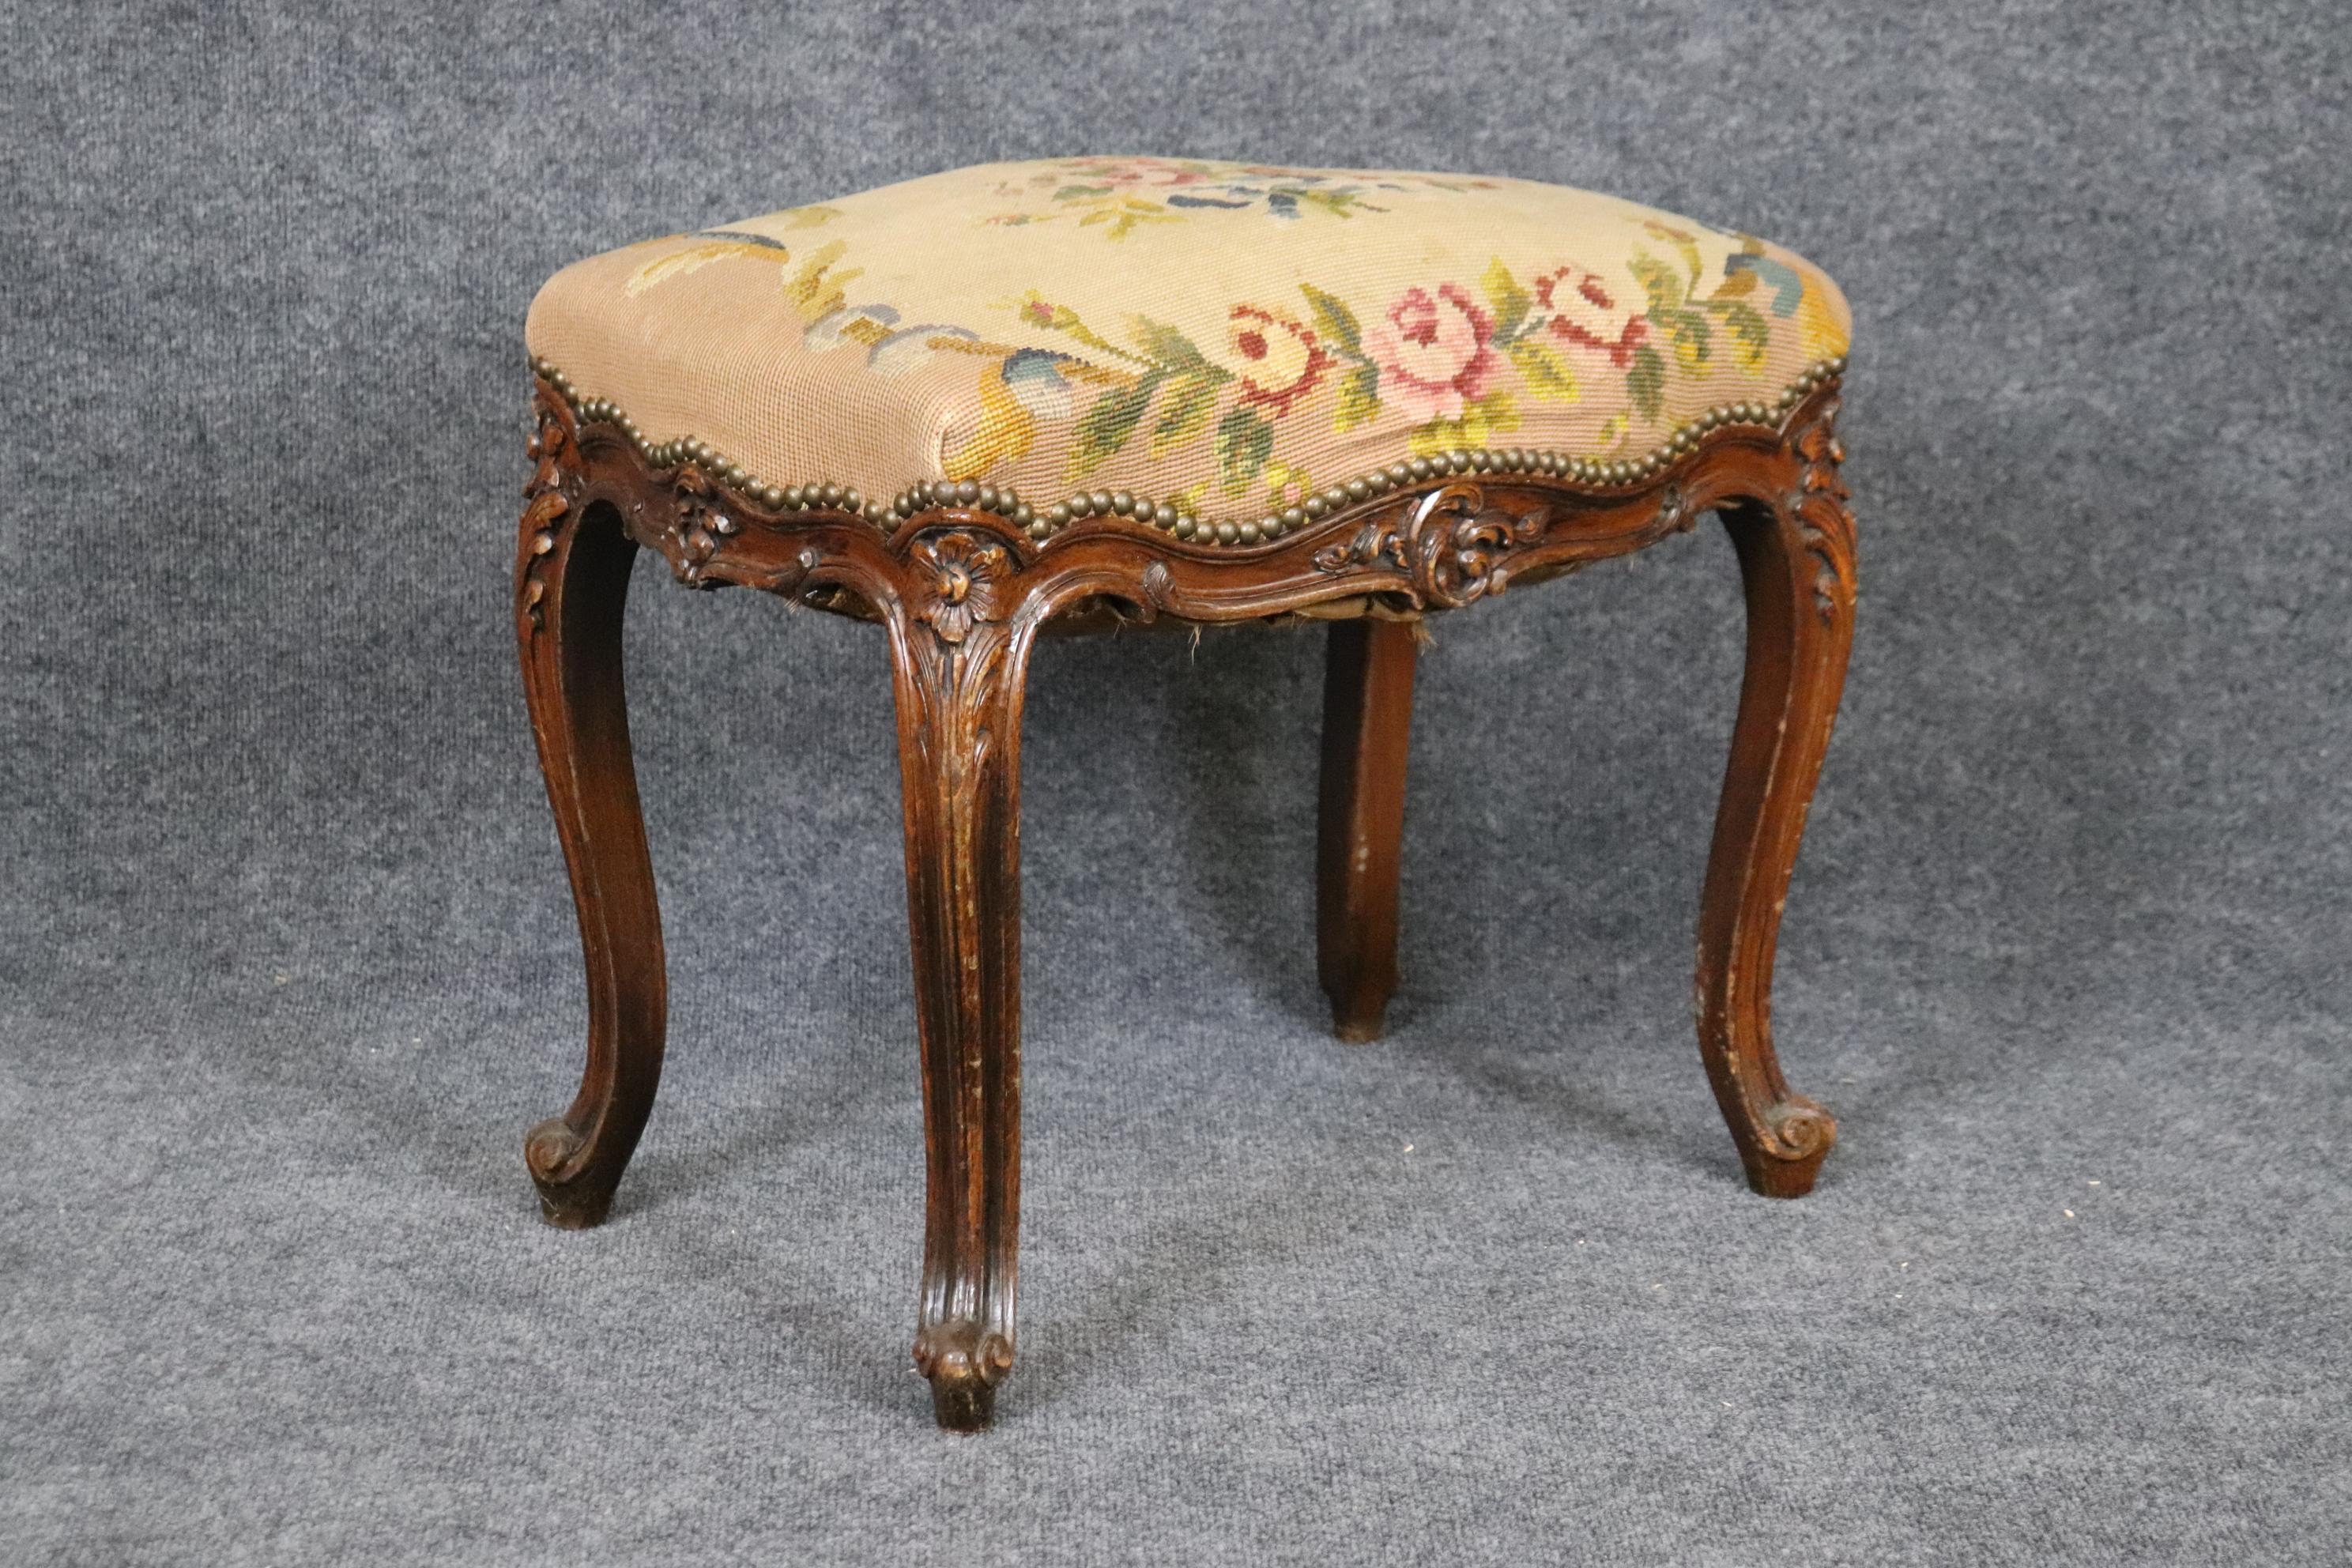 French Louis XV Carved Walnut Distressed Antique Needlepoint Upholstered Stool  In Good Condition For Sale In Swedesboro, NJ